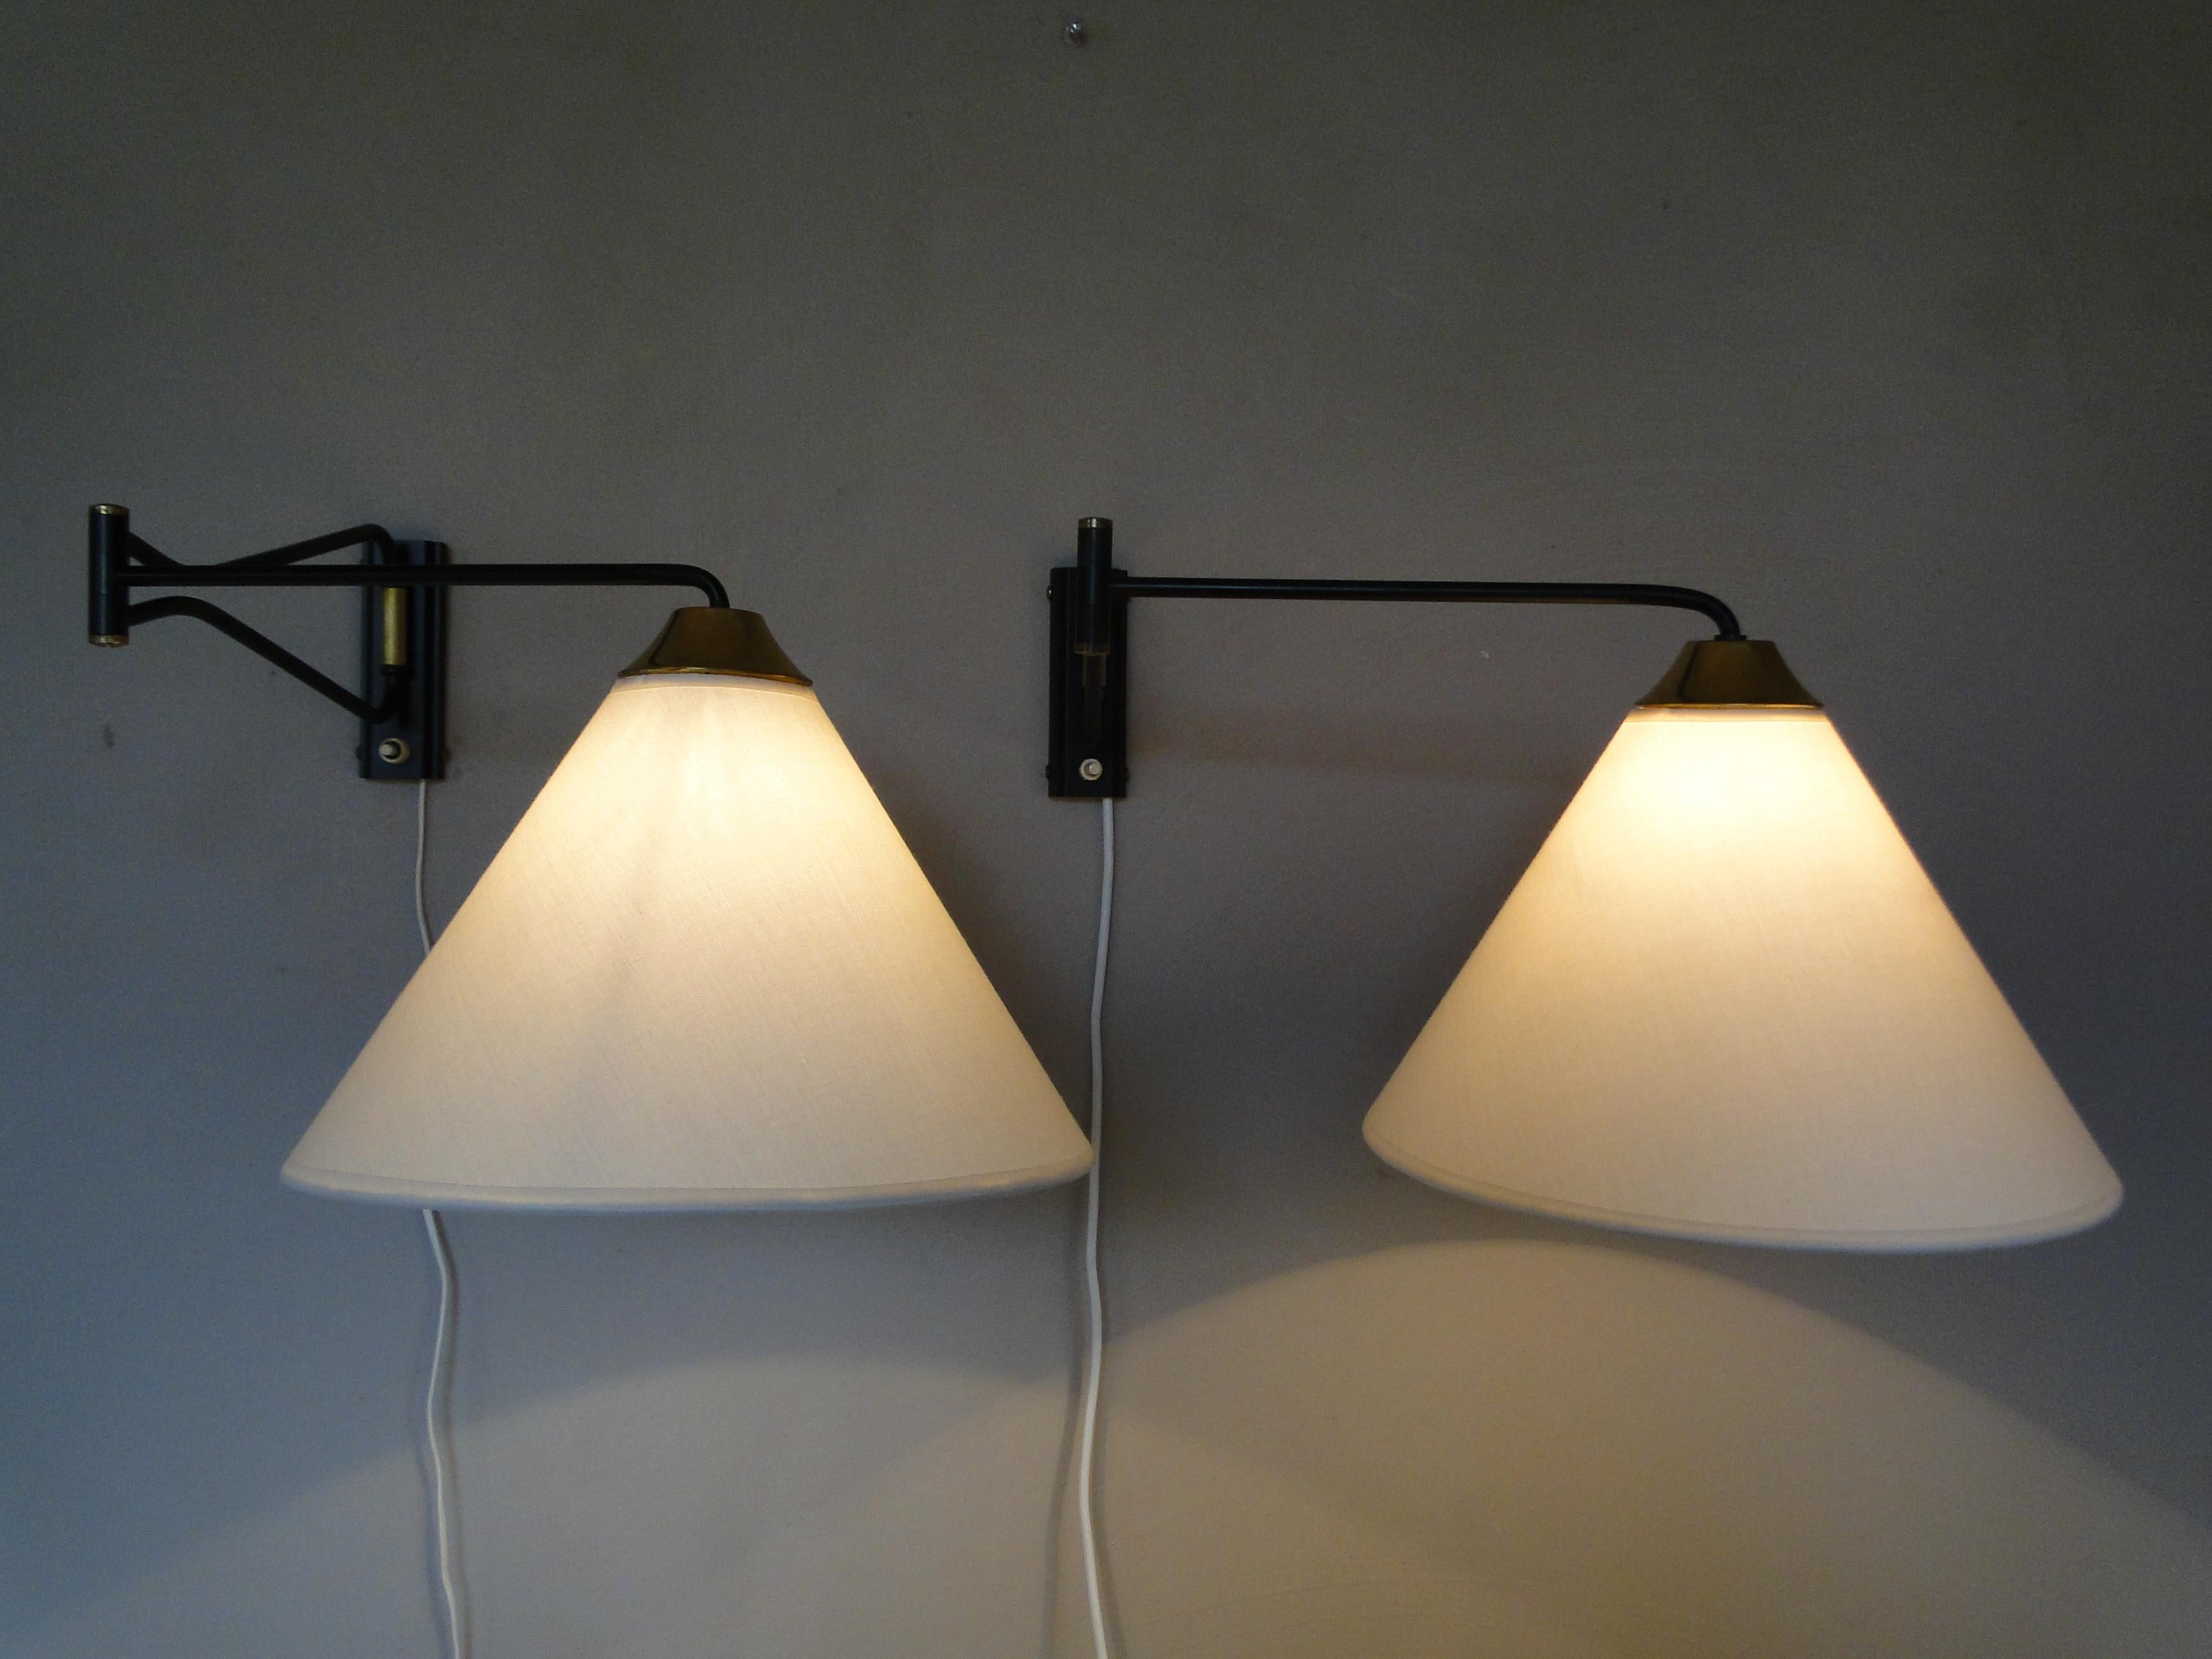  Pair of Rene Mathieu Swing Arm Sconces Wall lamp French Adjustable  Lunel Arlus For Sale 3